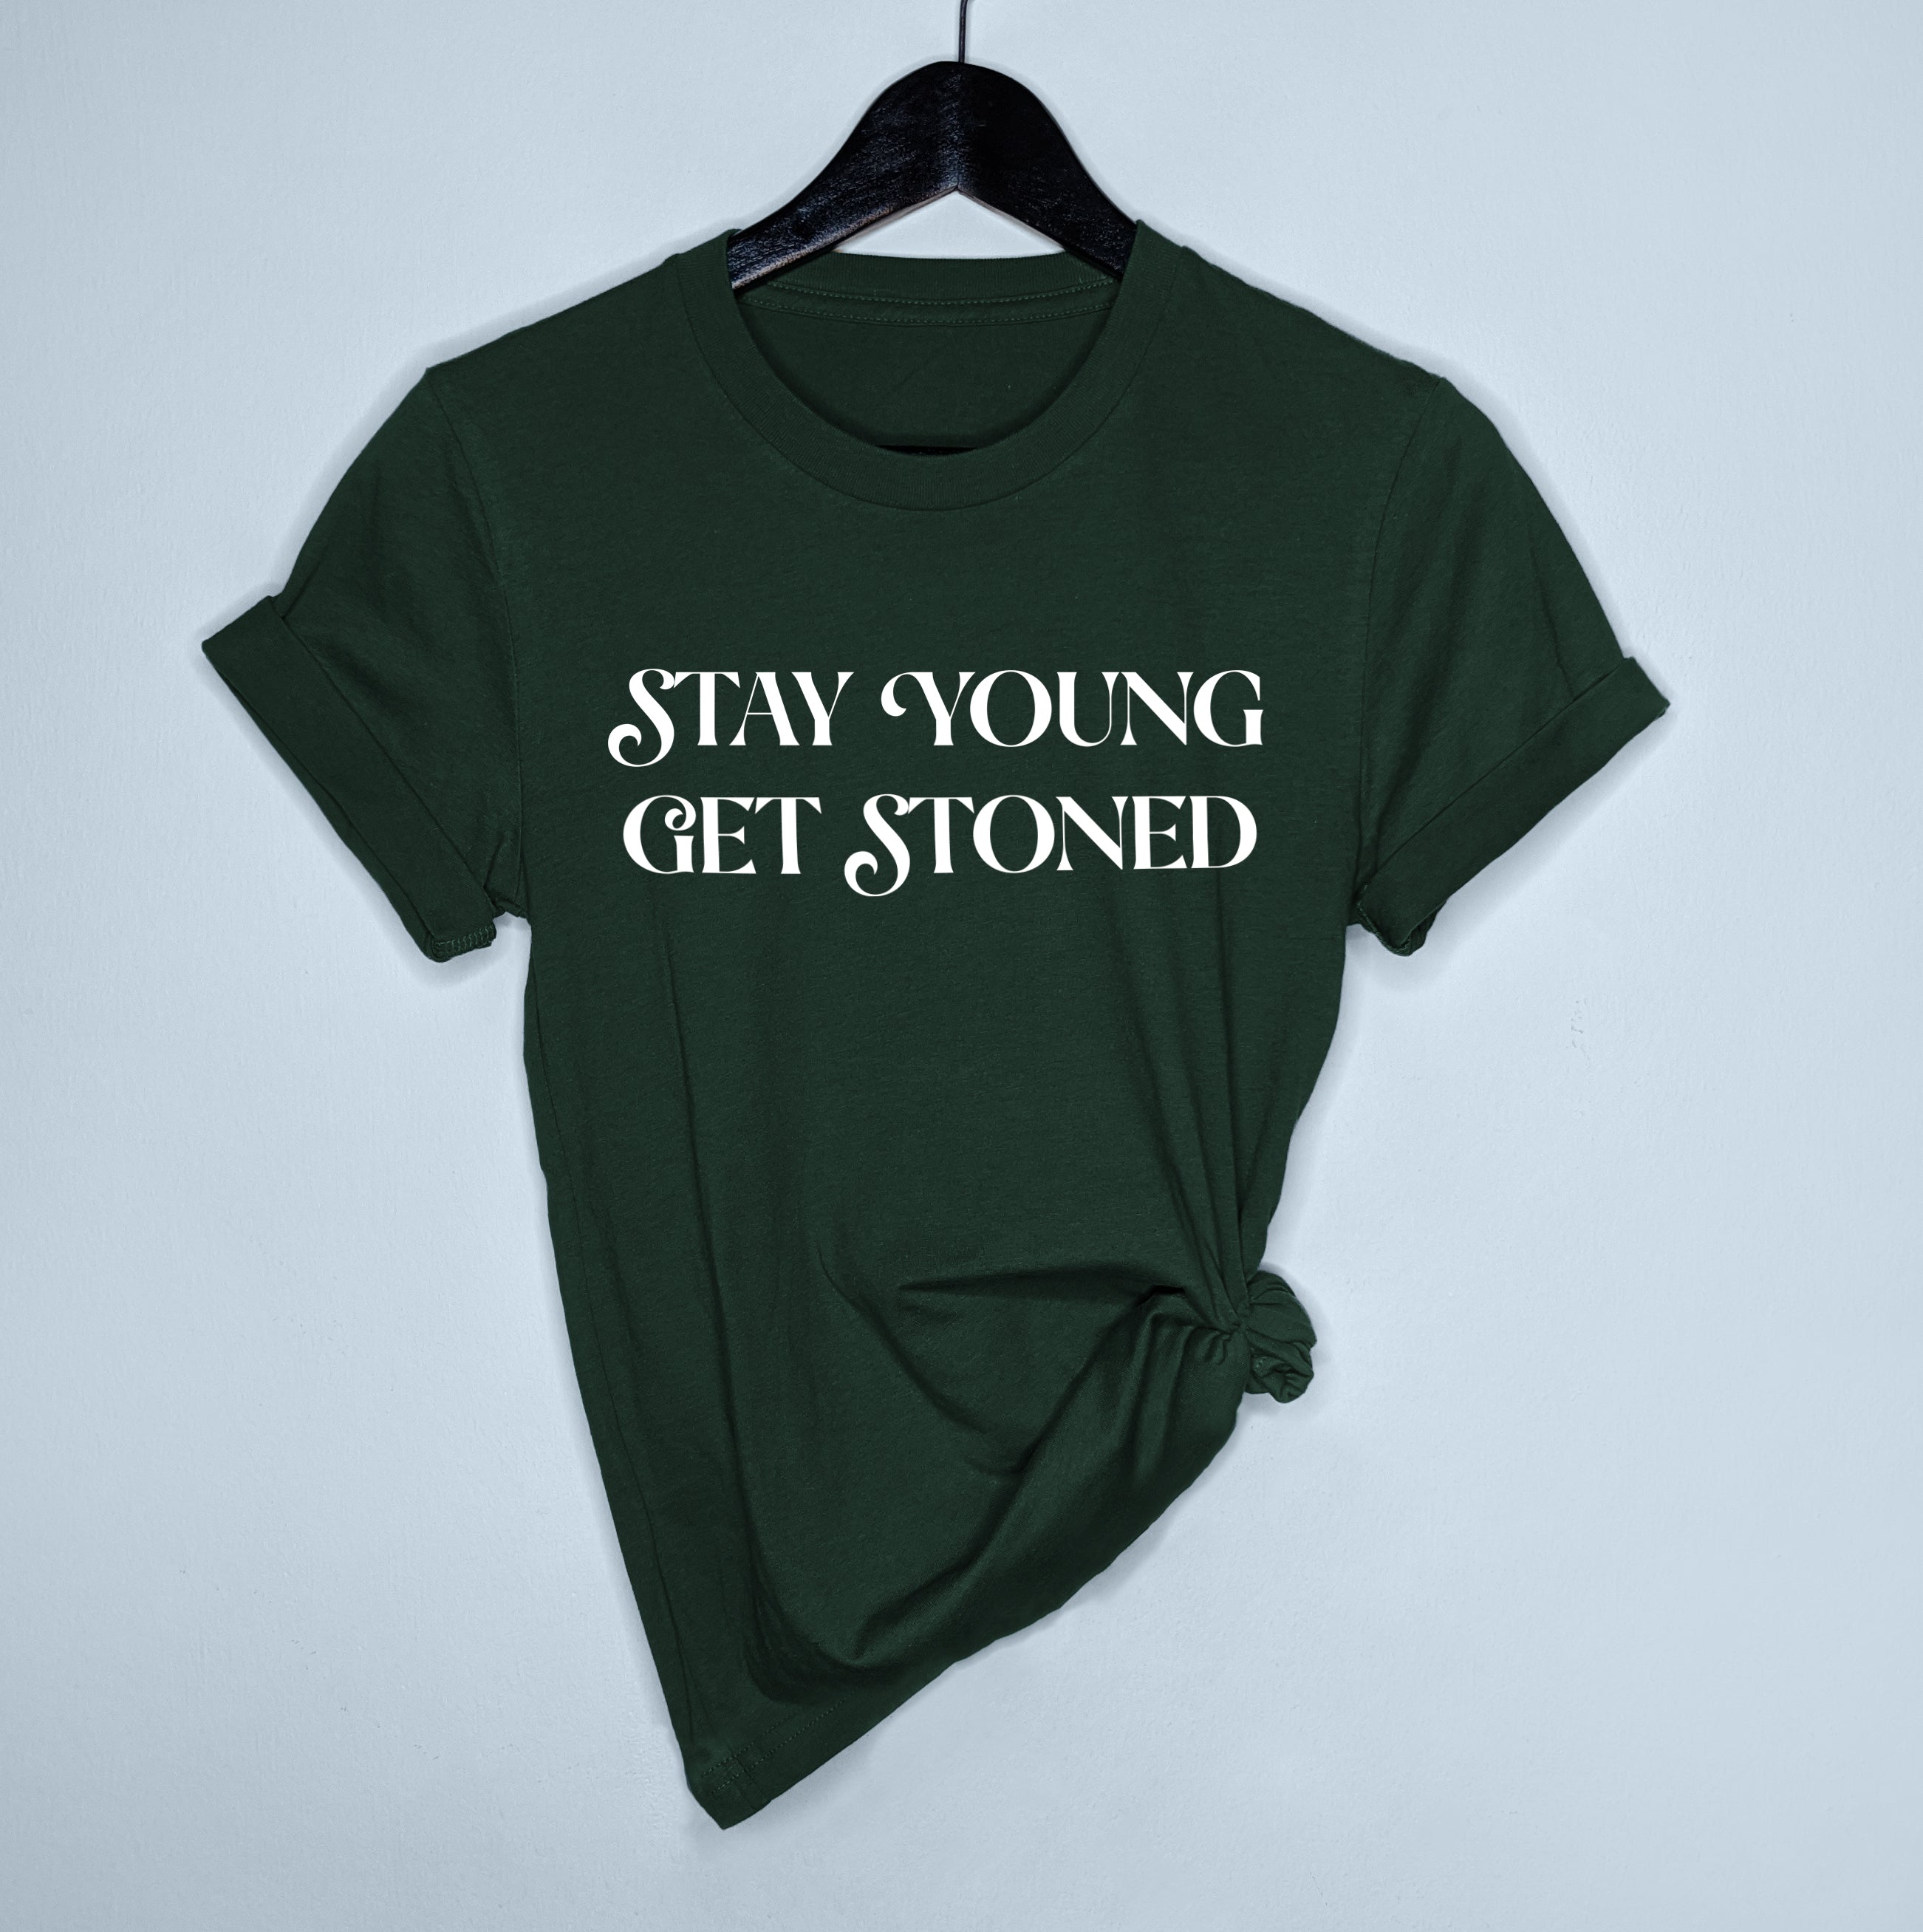 Forest shirt saying stay young get stoned - HighCiti